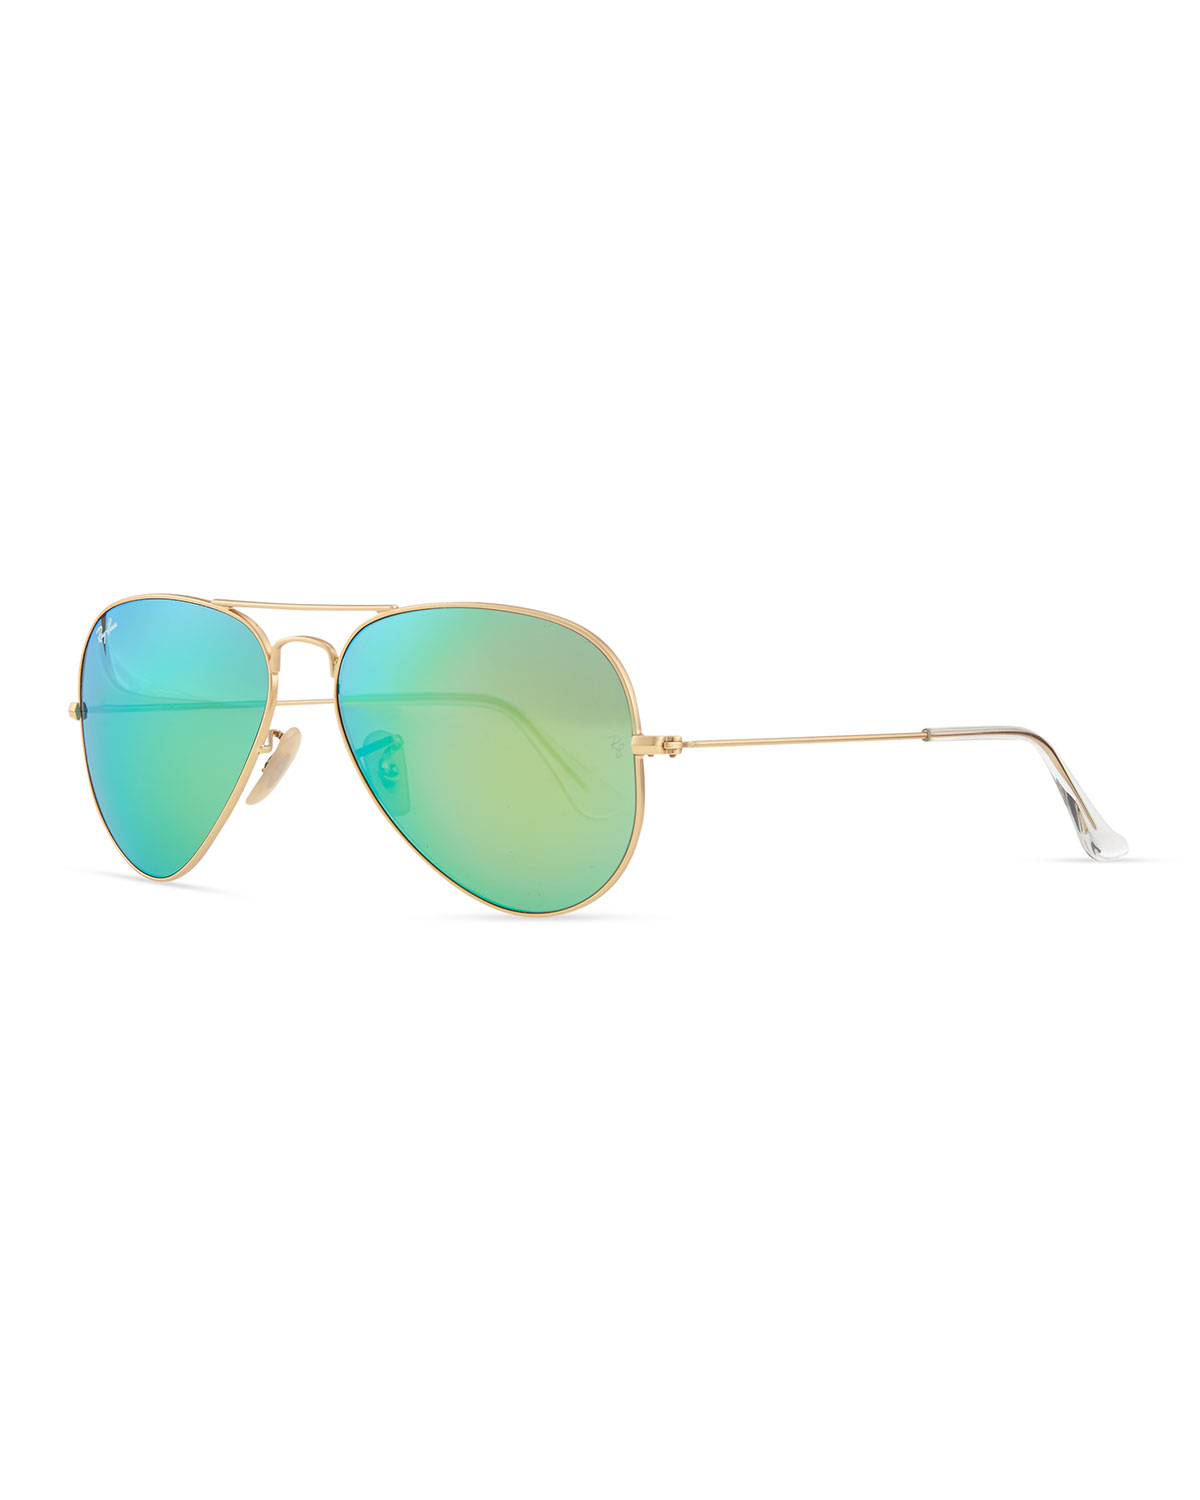 Ray-ban Aviator Sunglasses With Flash Lenses in Blue (gold ...